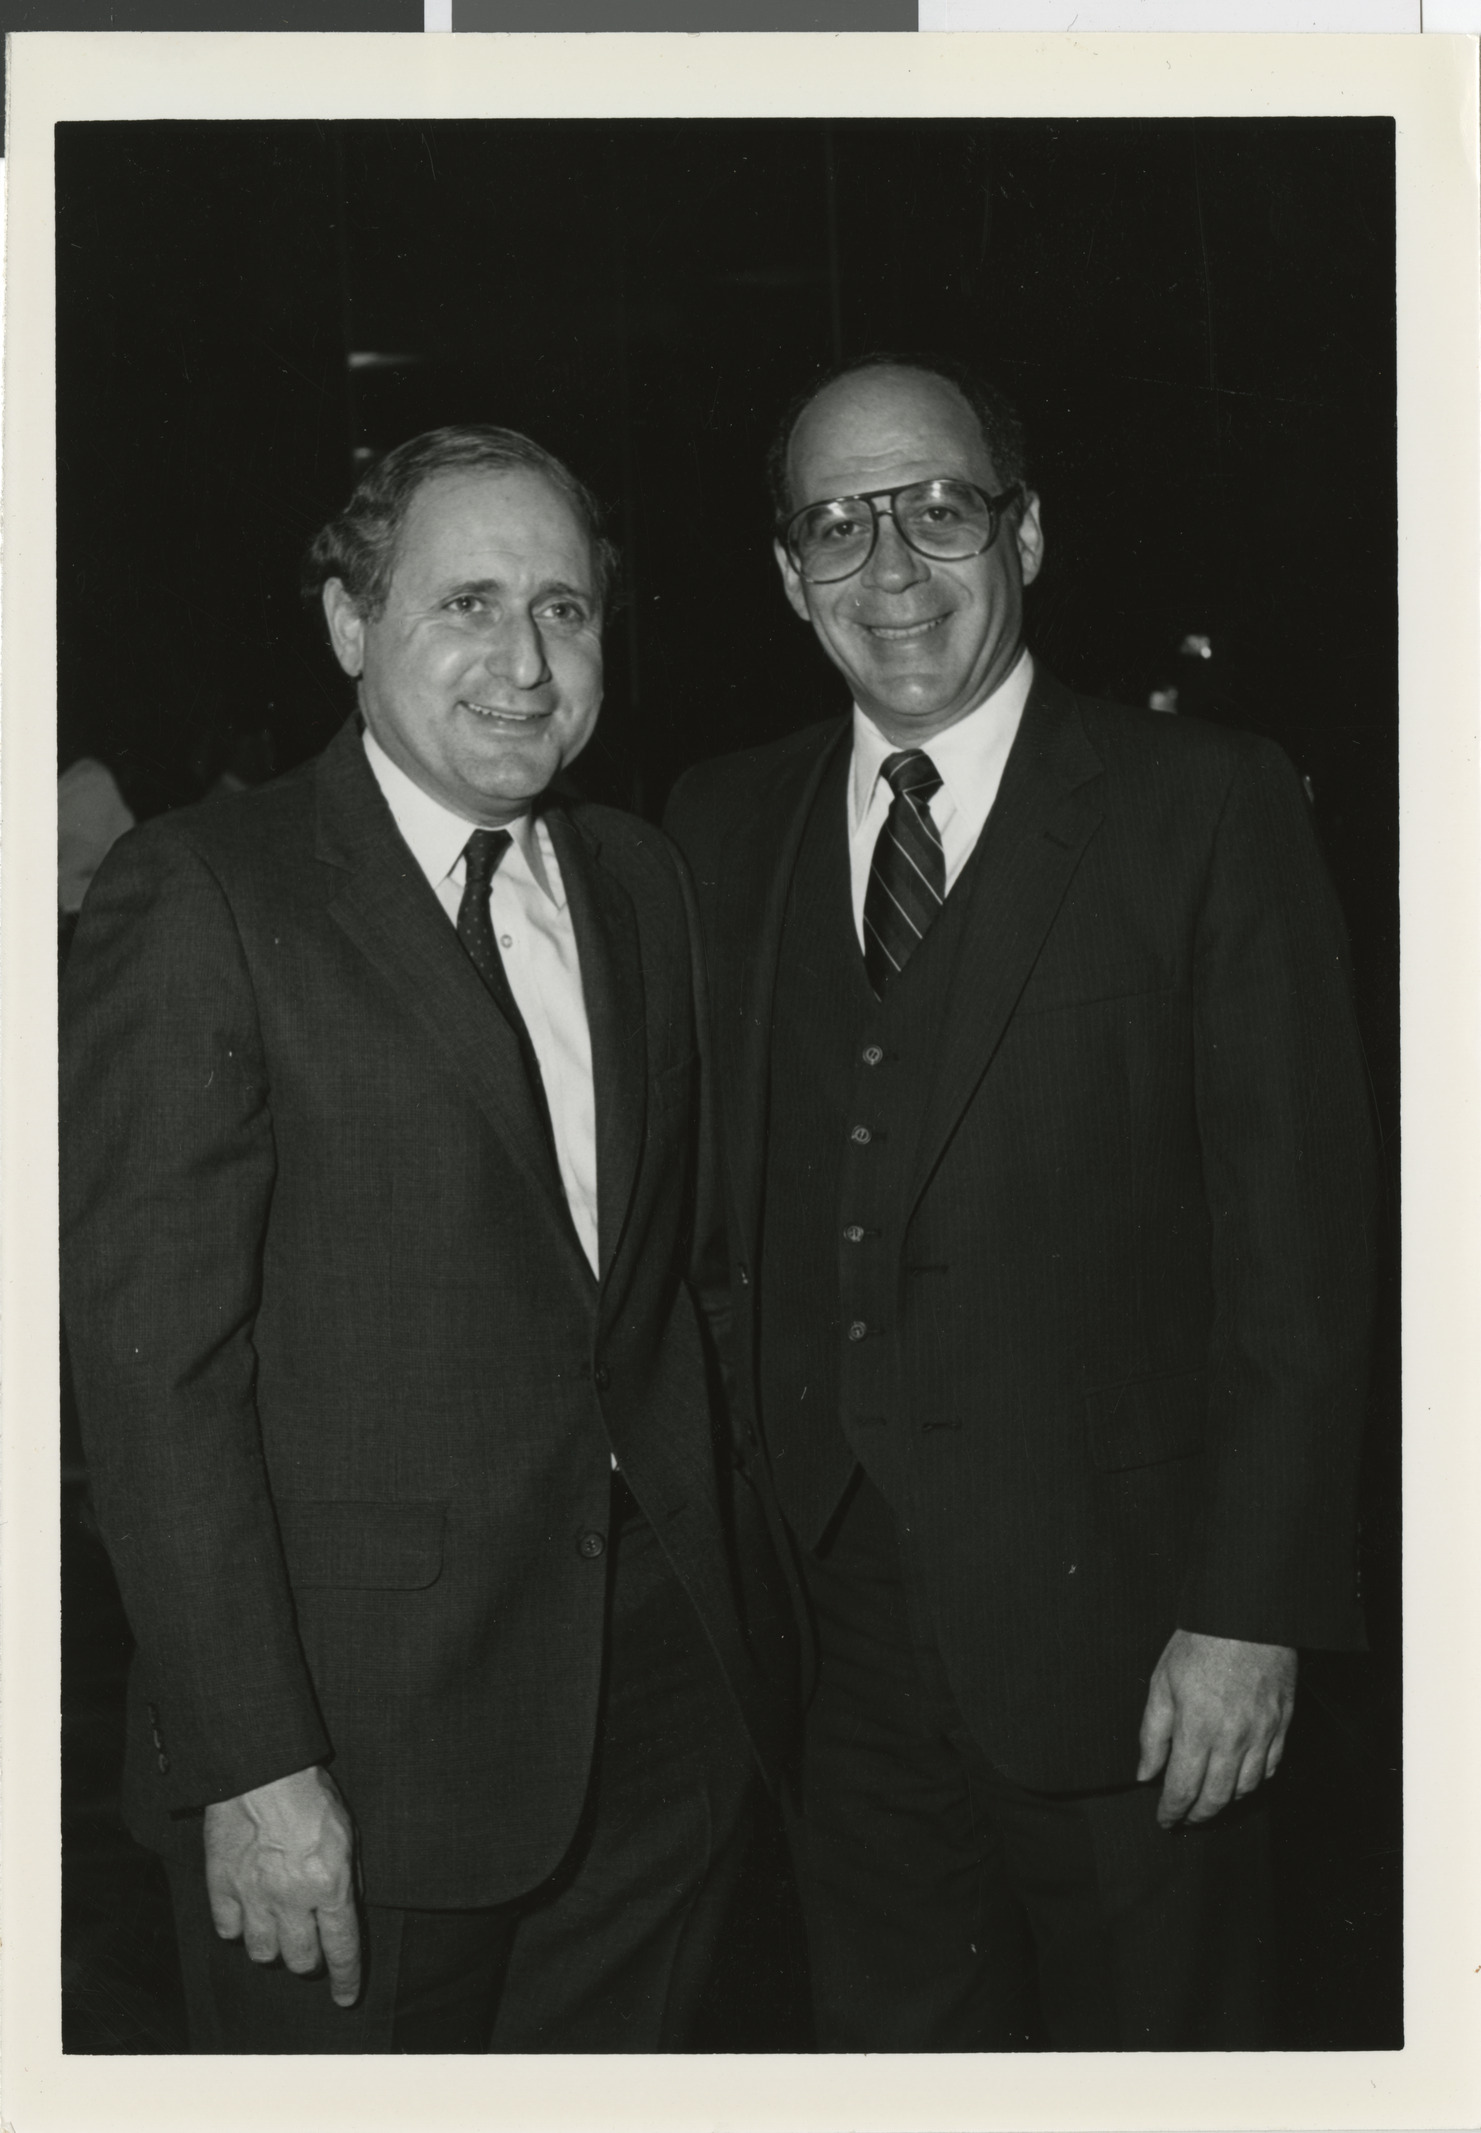 Photograph of Carl Levin and Dennis Sabbath, date unknown